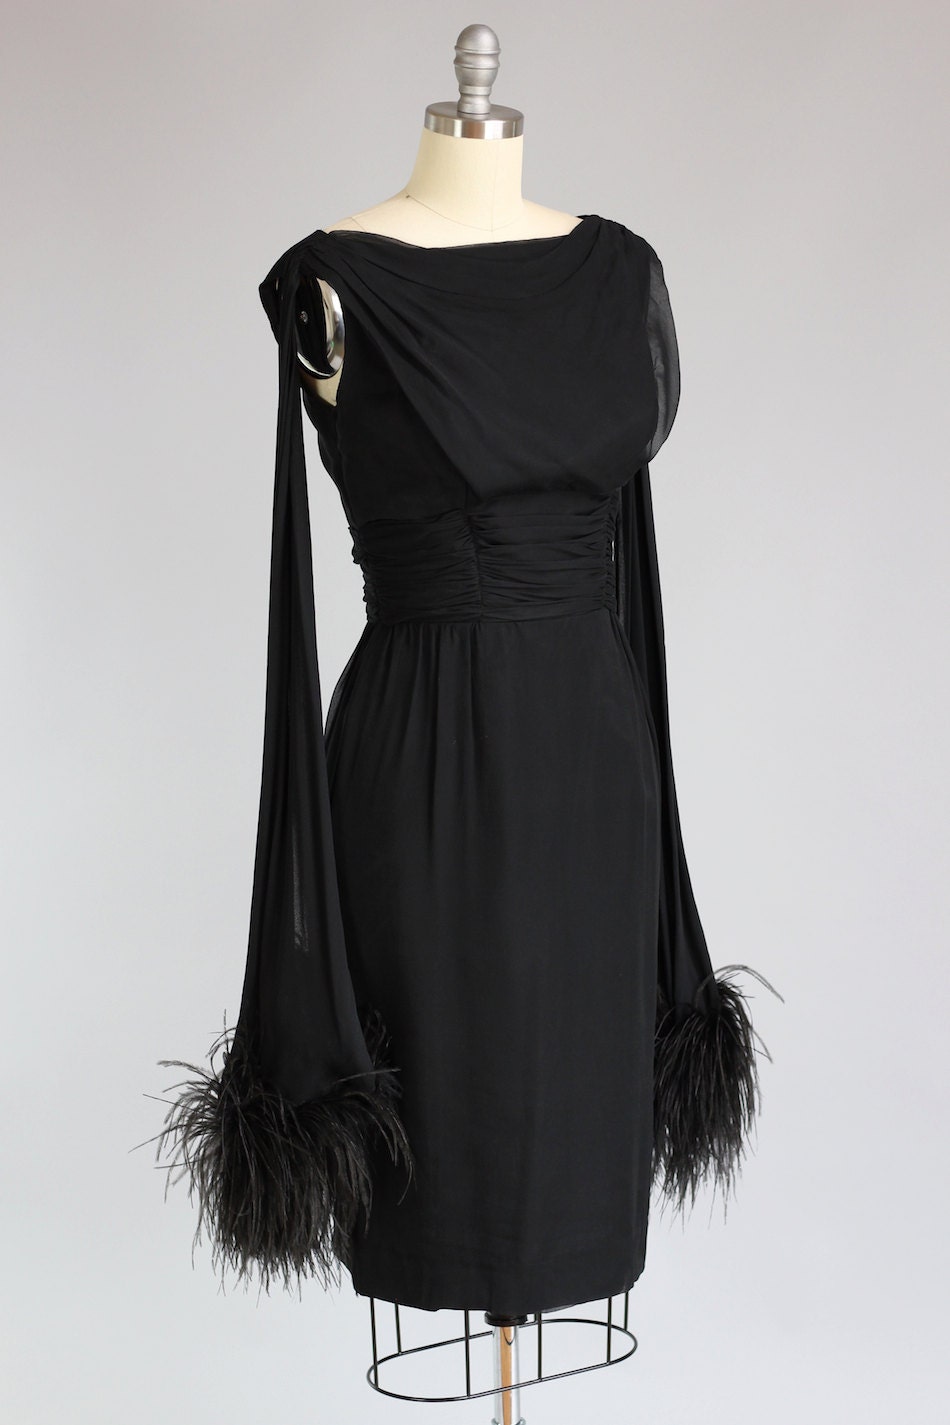 Vintage Osterich Feather Lined Black Cocktail Dress